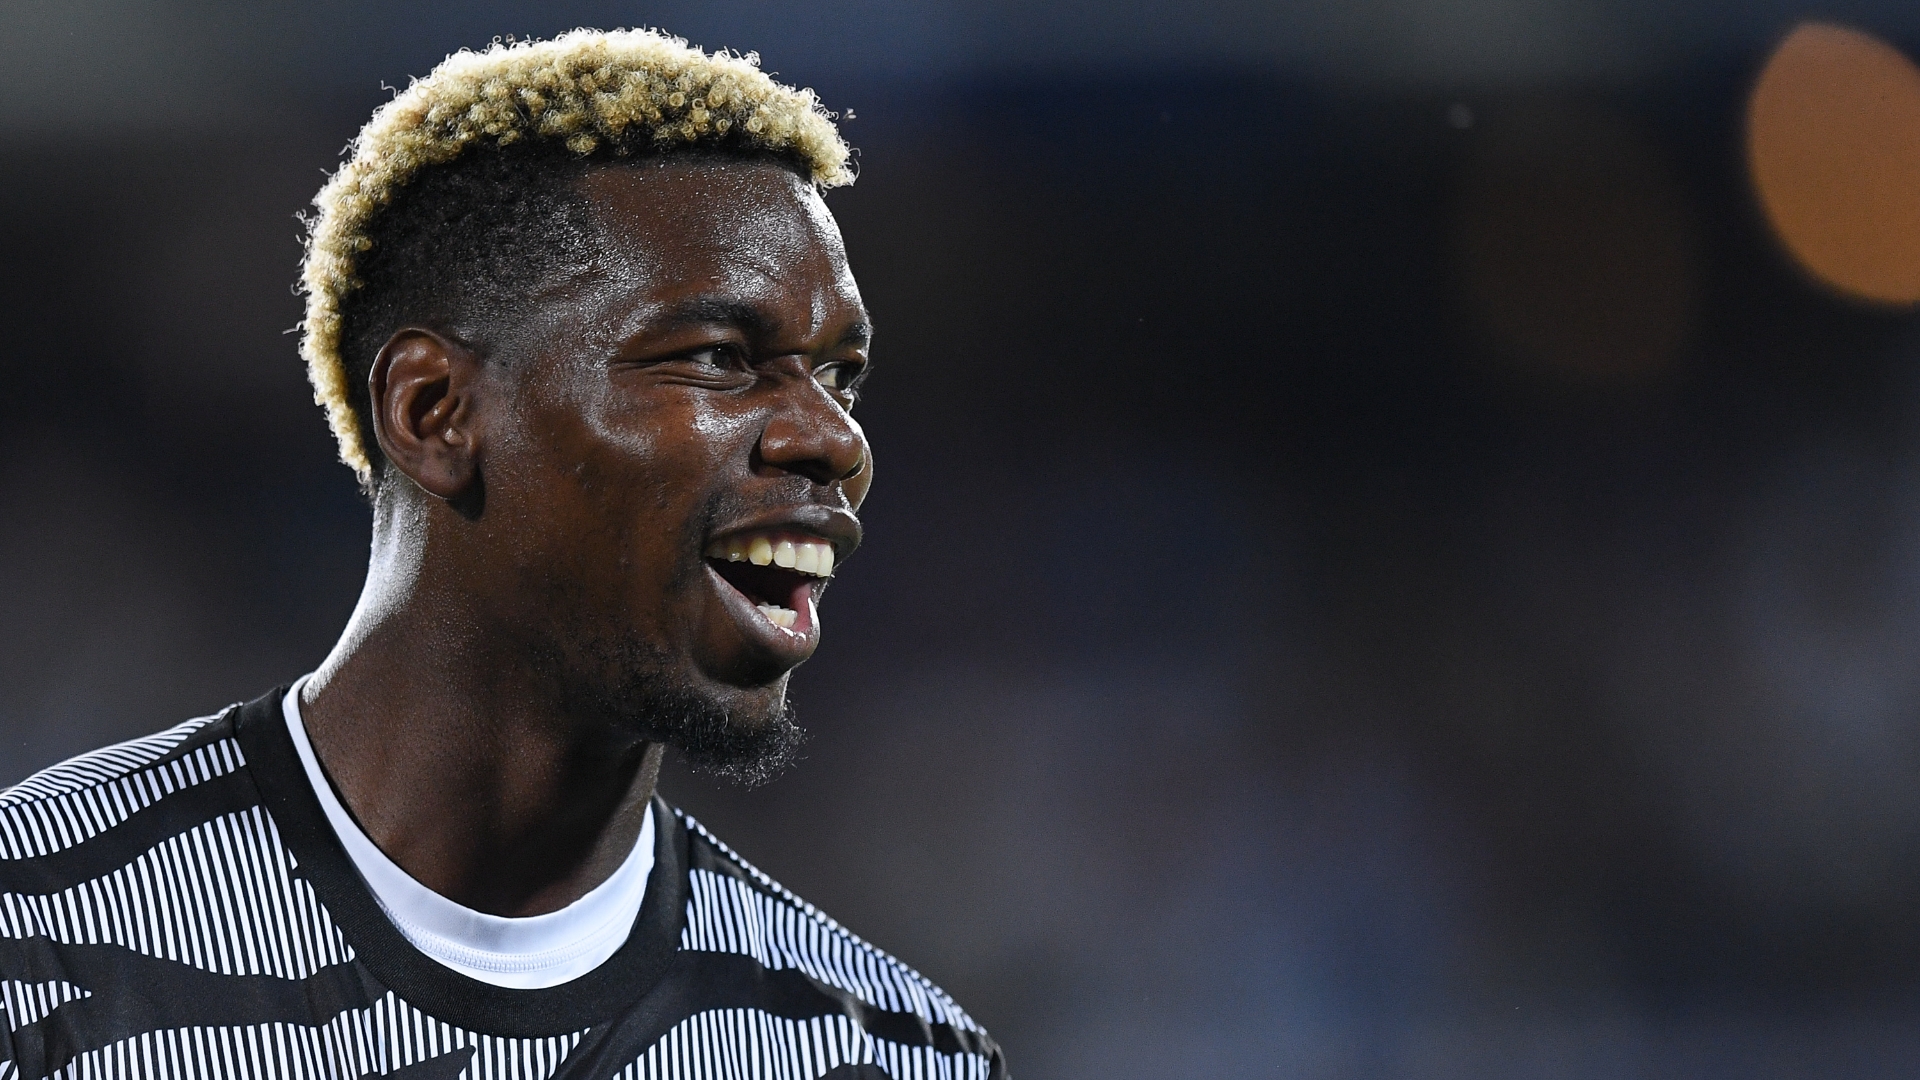 Paul Pogba tuns his attention to acting